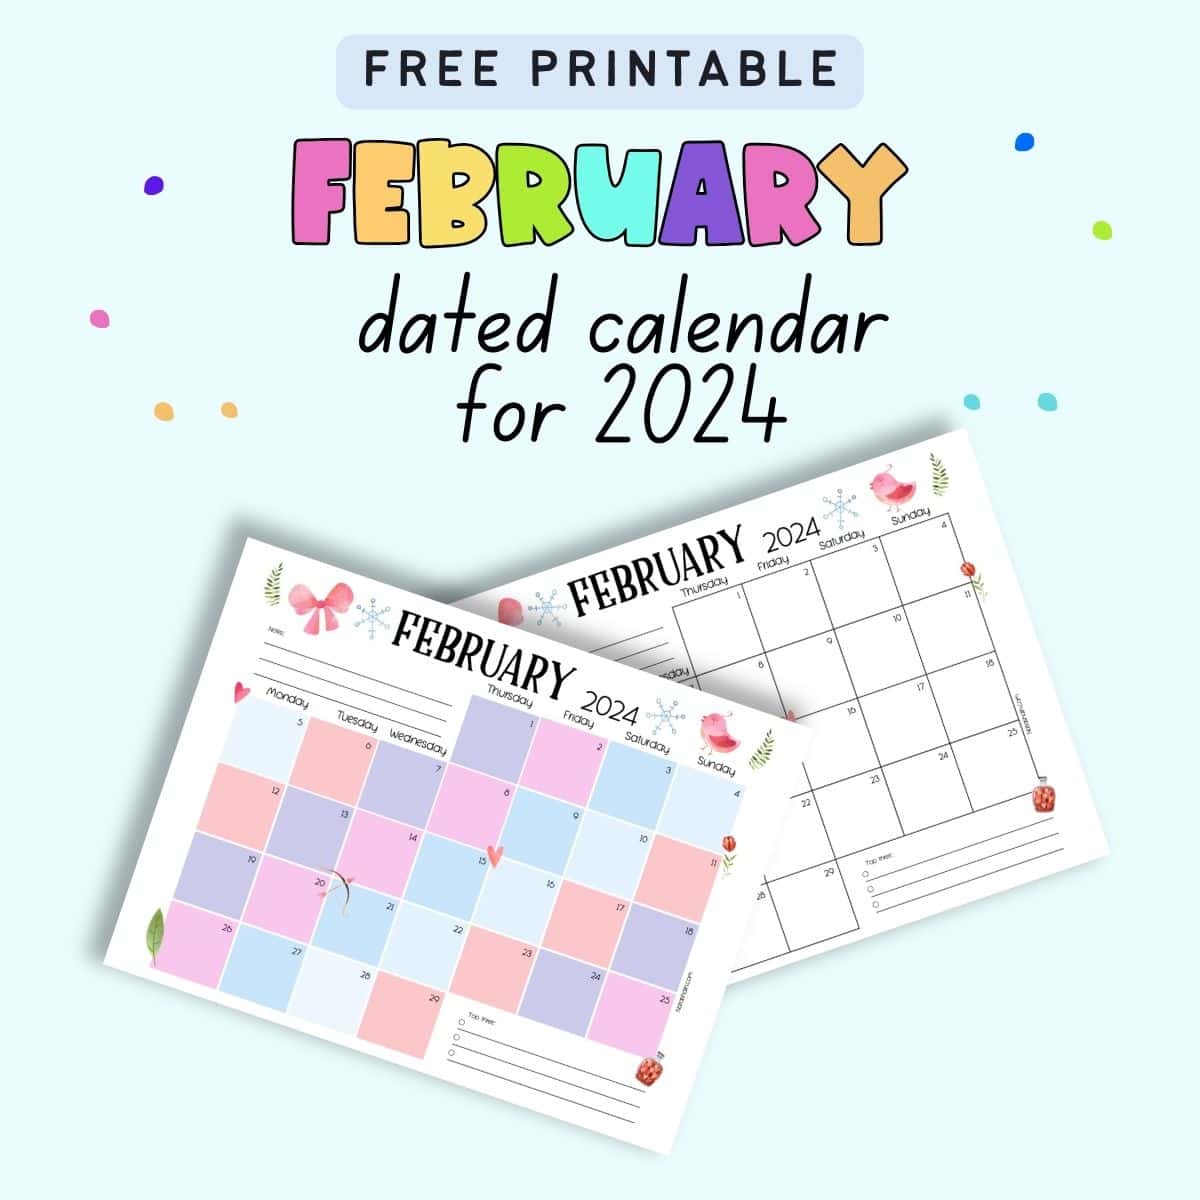 Text "free printable February dated calendar for 2024" with a preview of two dated calendar pages